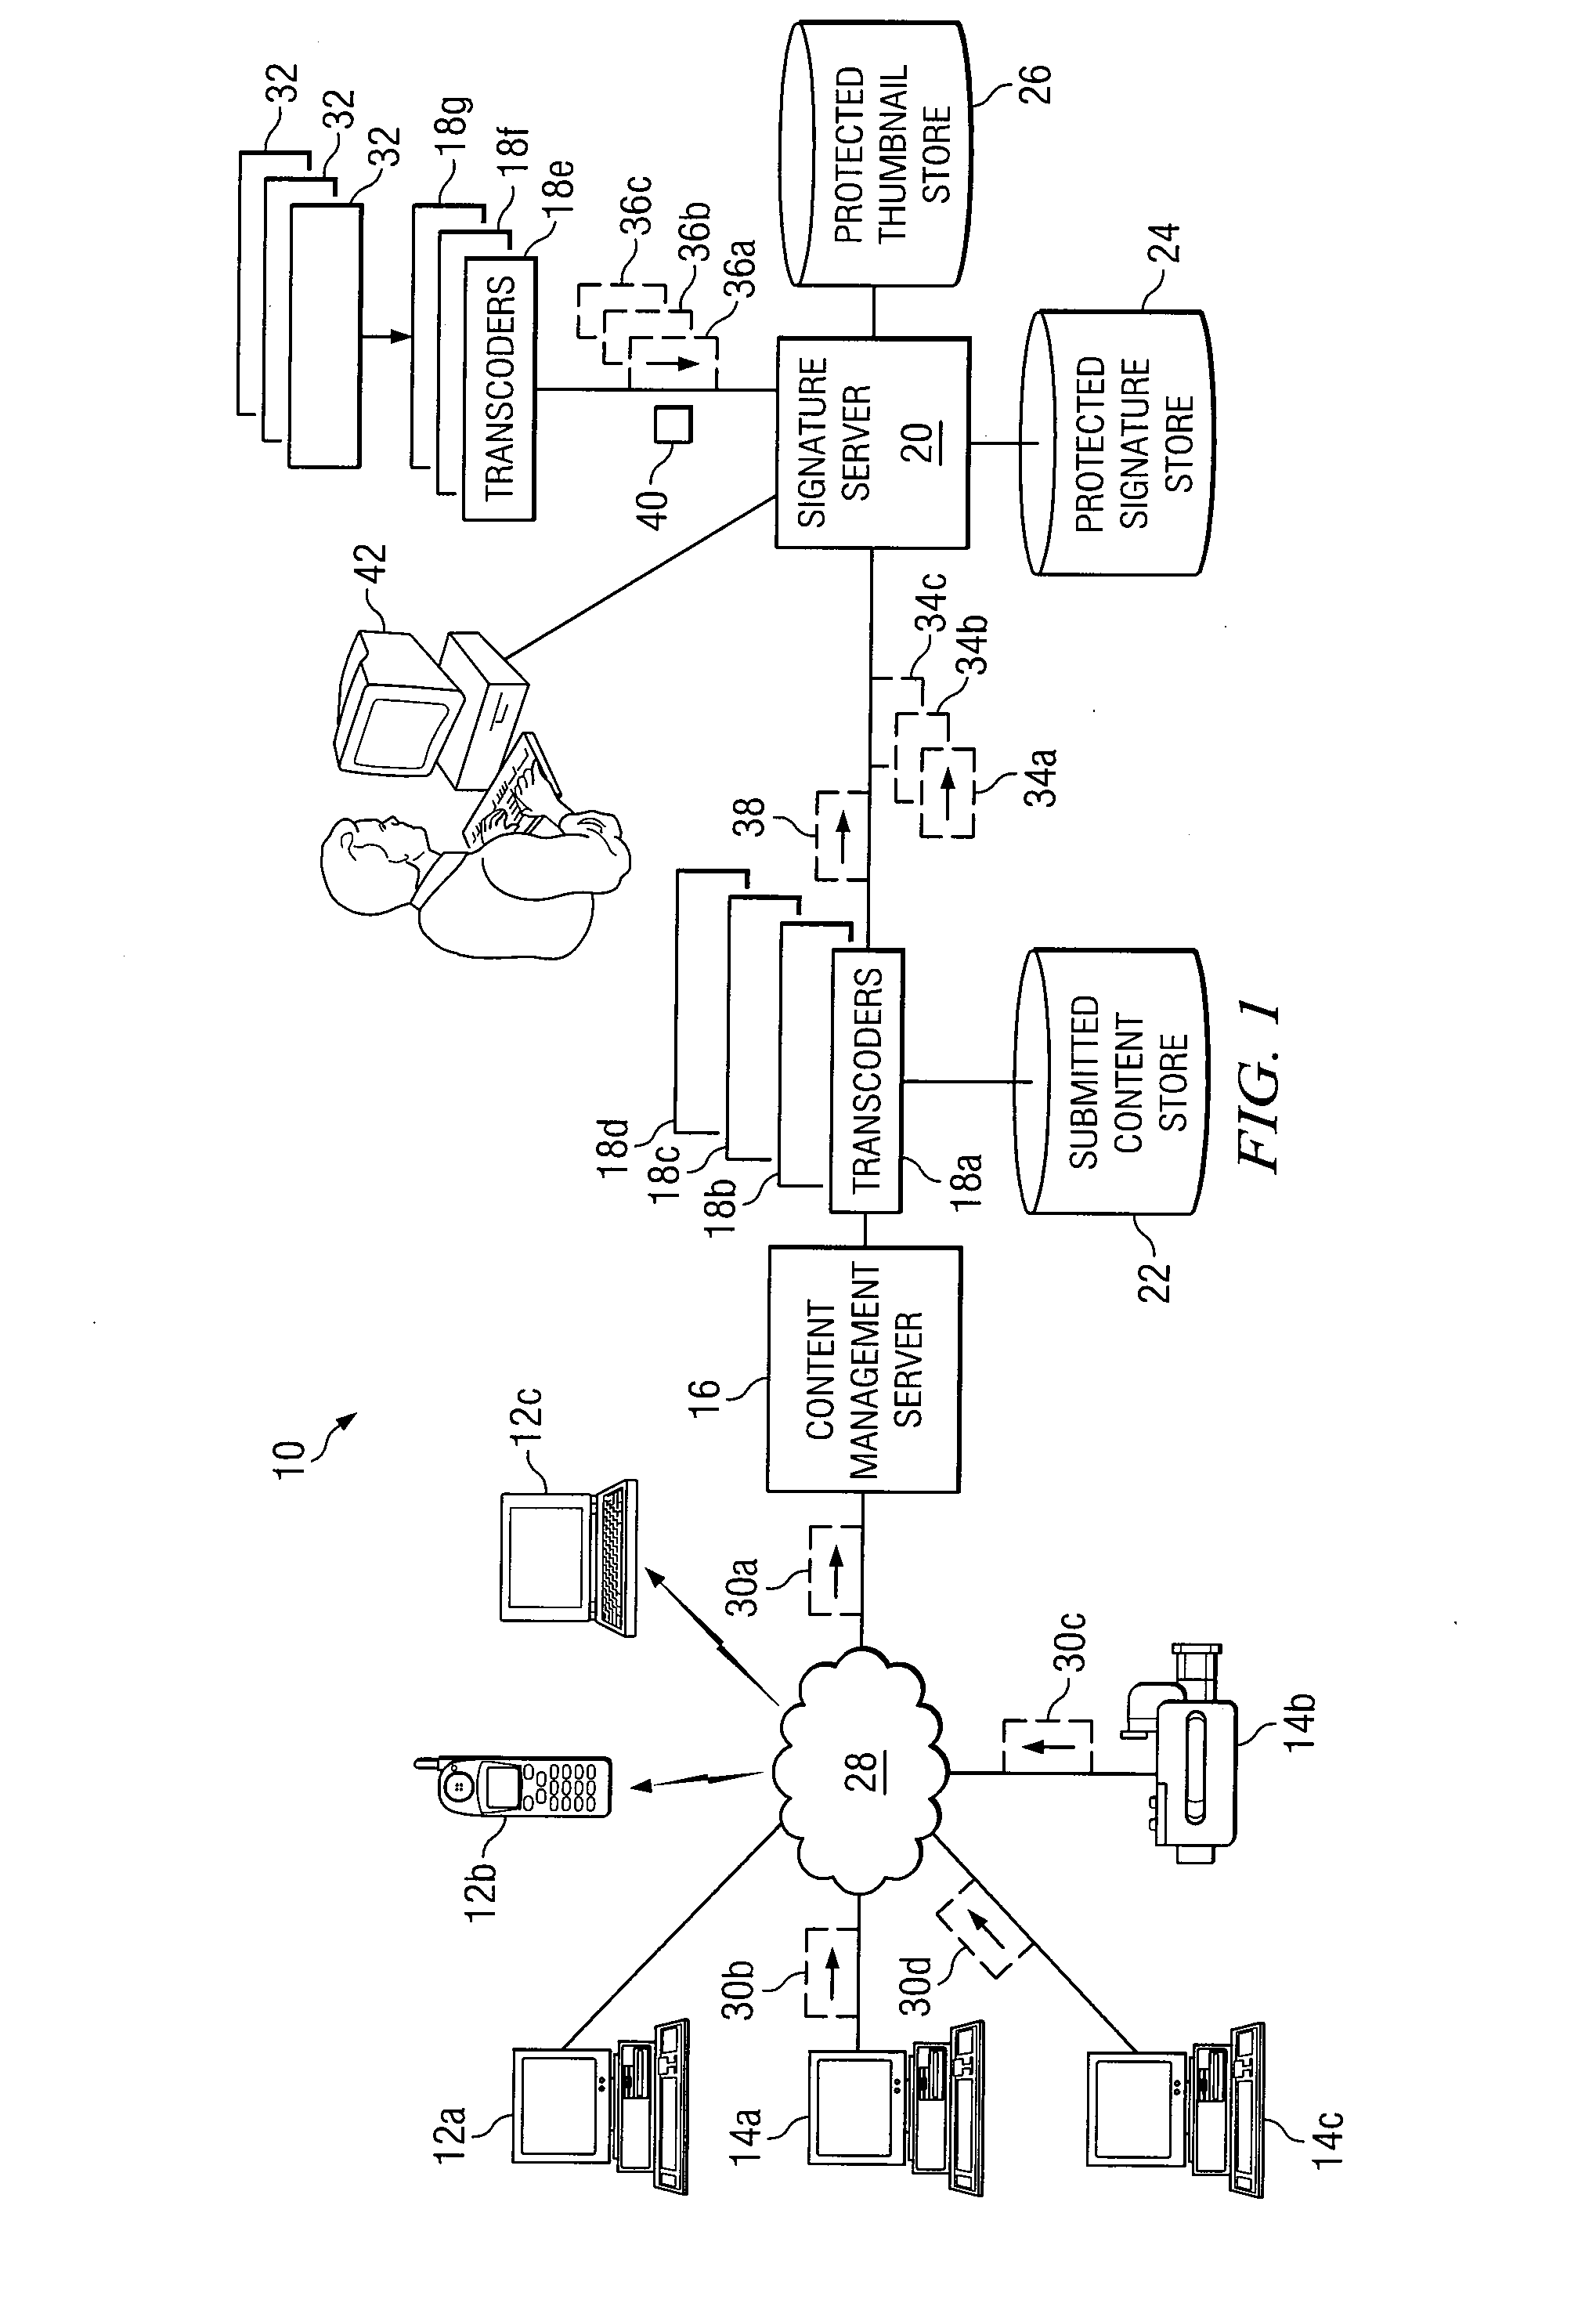 System and Method for Identifying Content